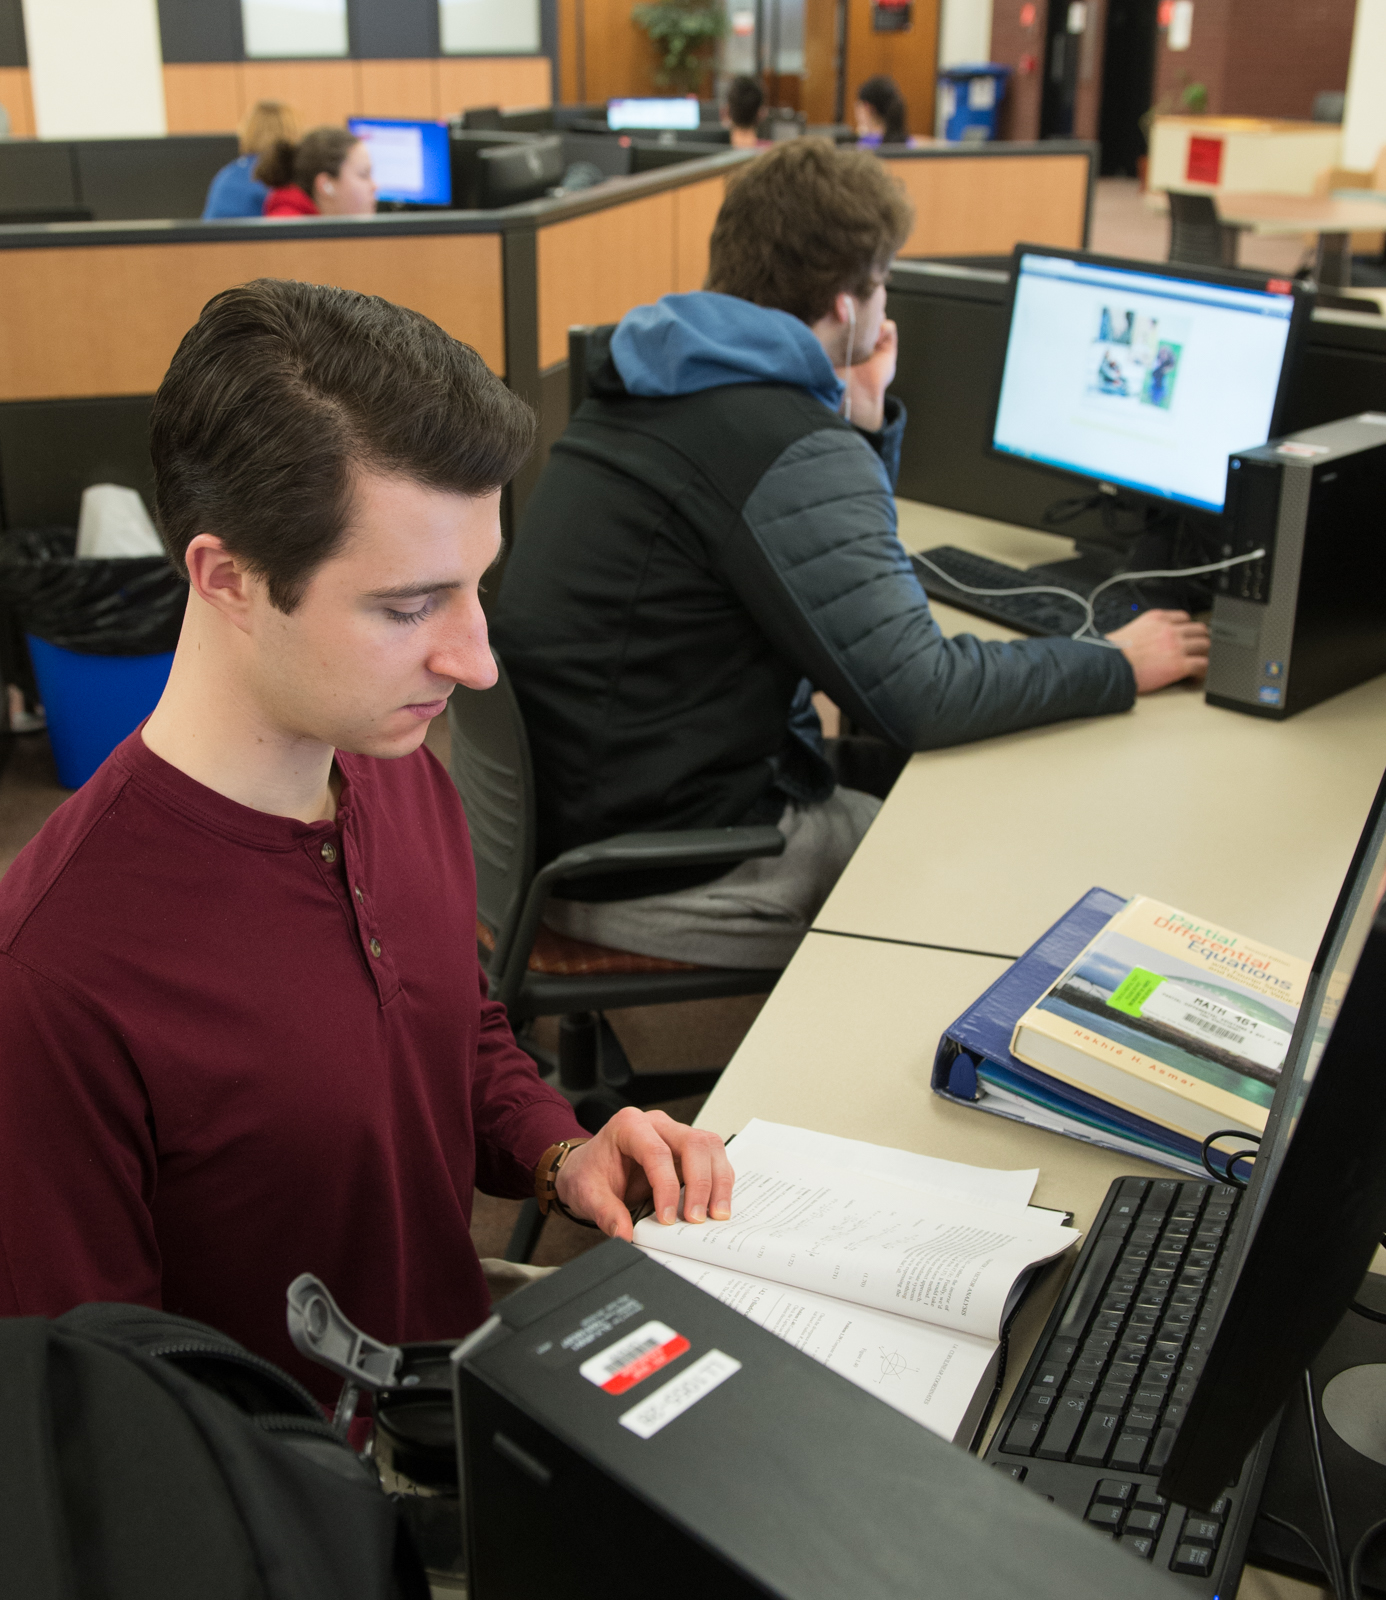 Innovative Library Services Draw Increased Traffic Among SIUE Students